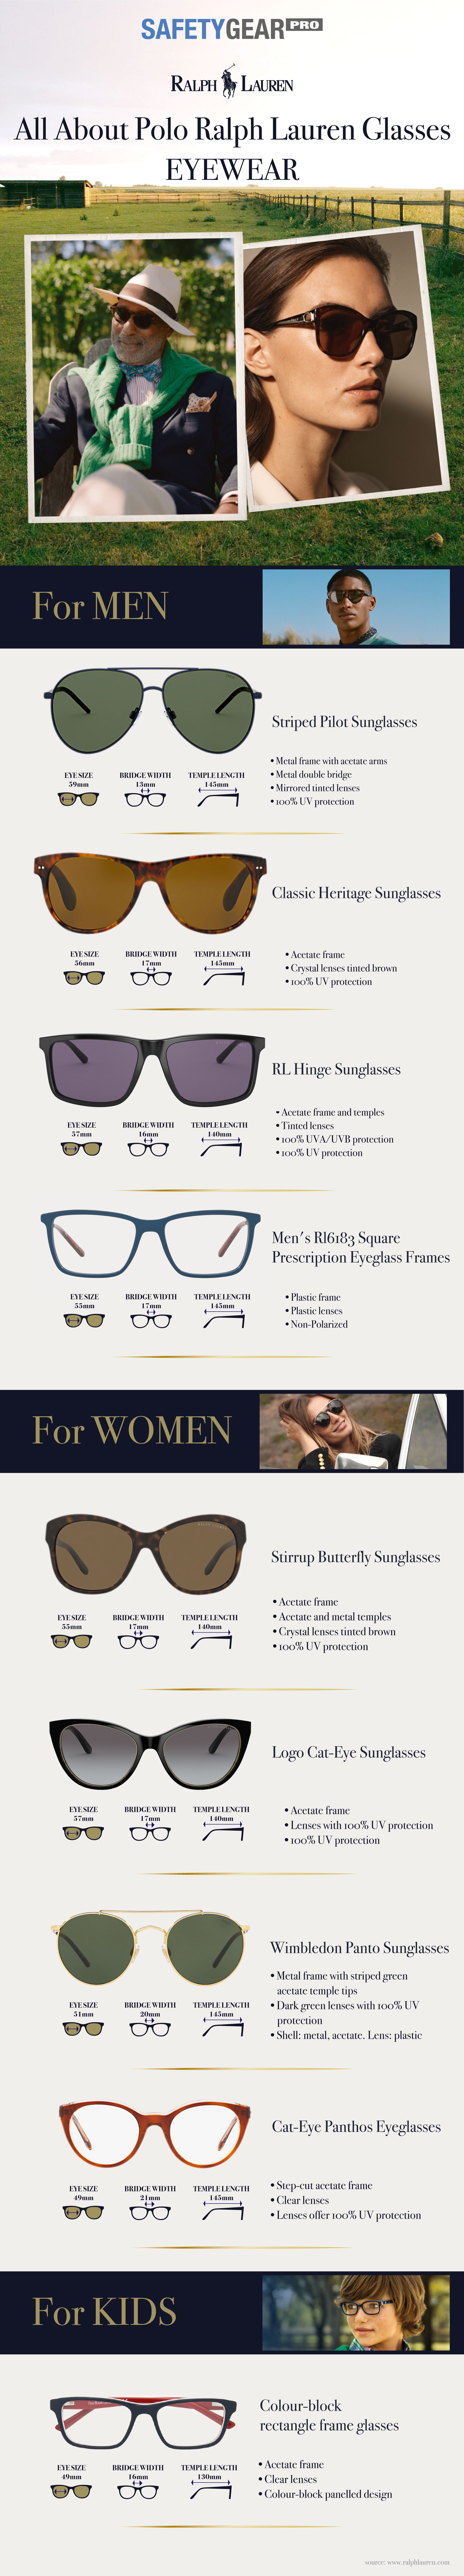 All About Polo Ralph Lauren Glasses Infographic